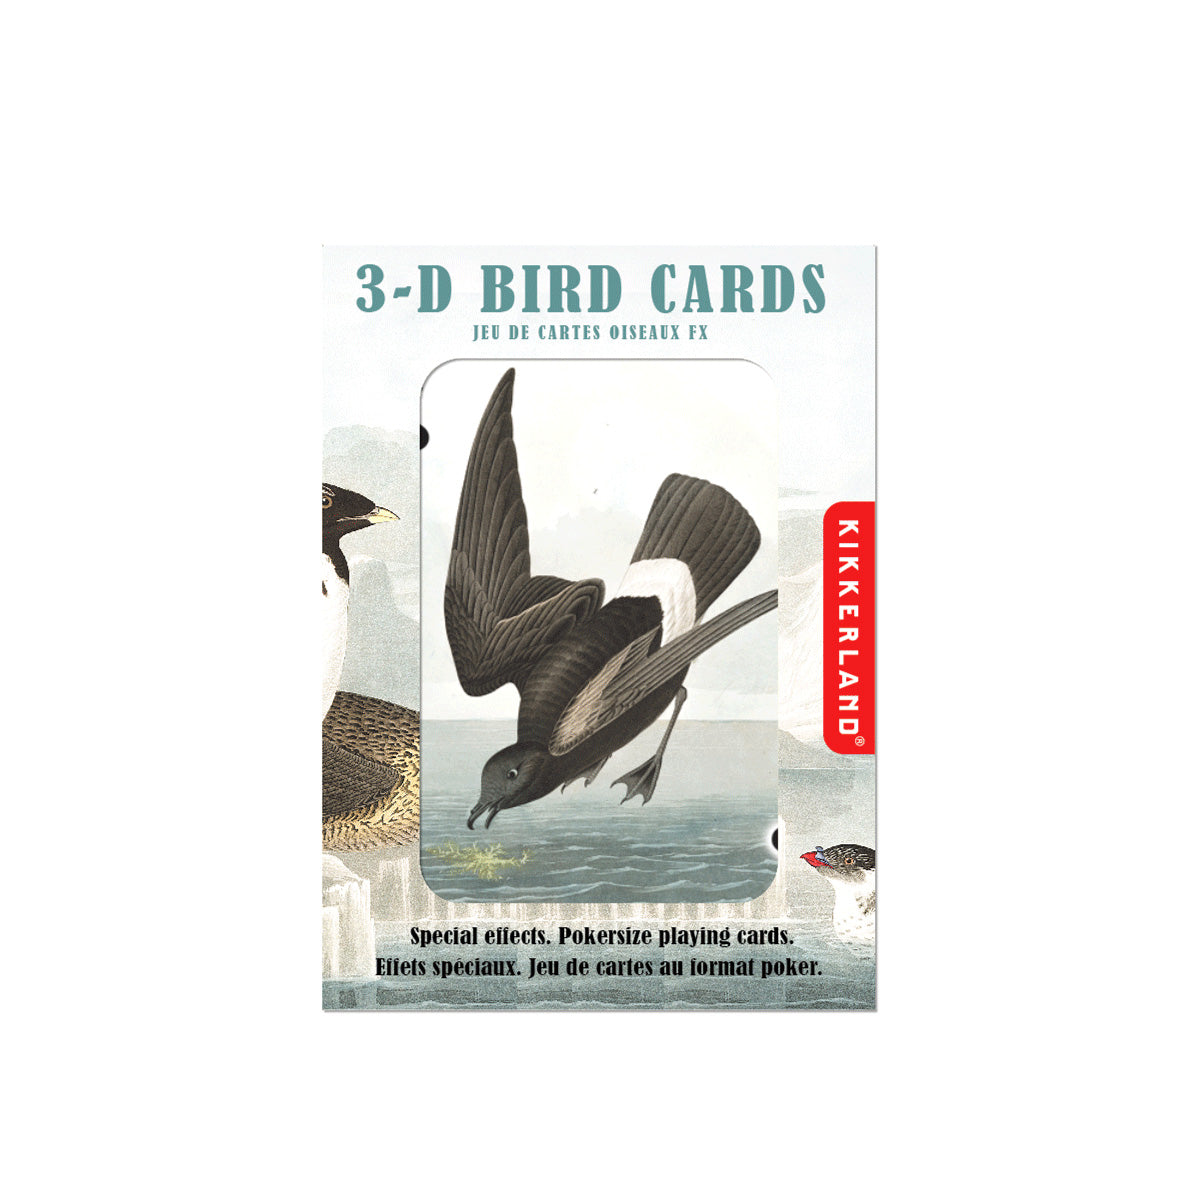 Birds 3D Lenticular Playing Cards from Kikkerland